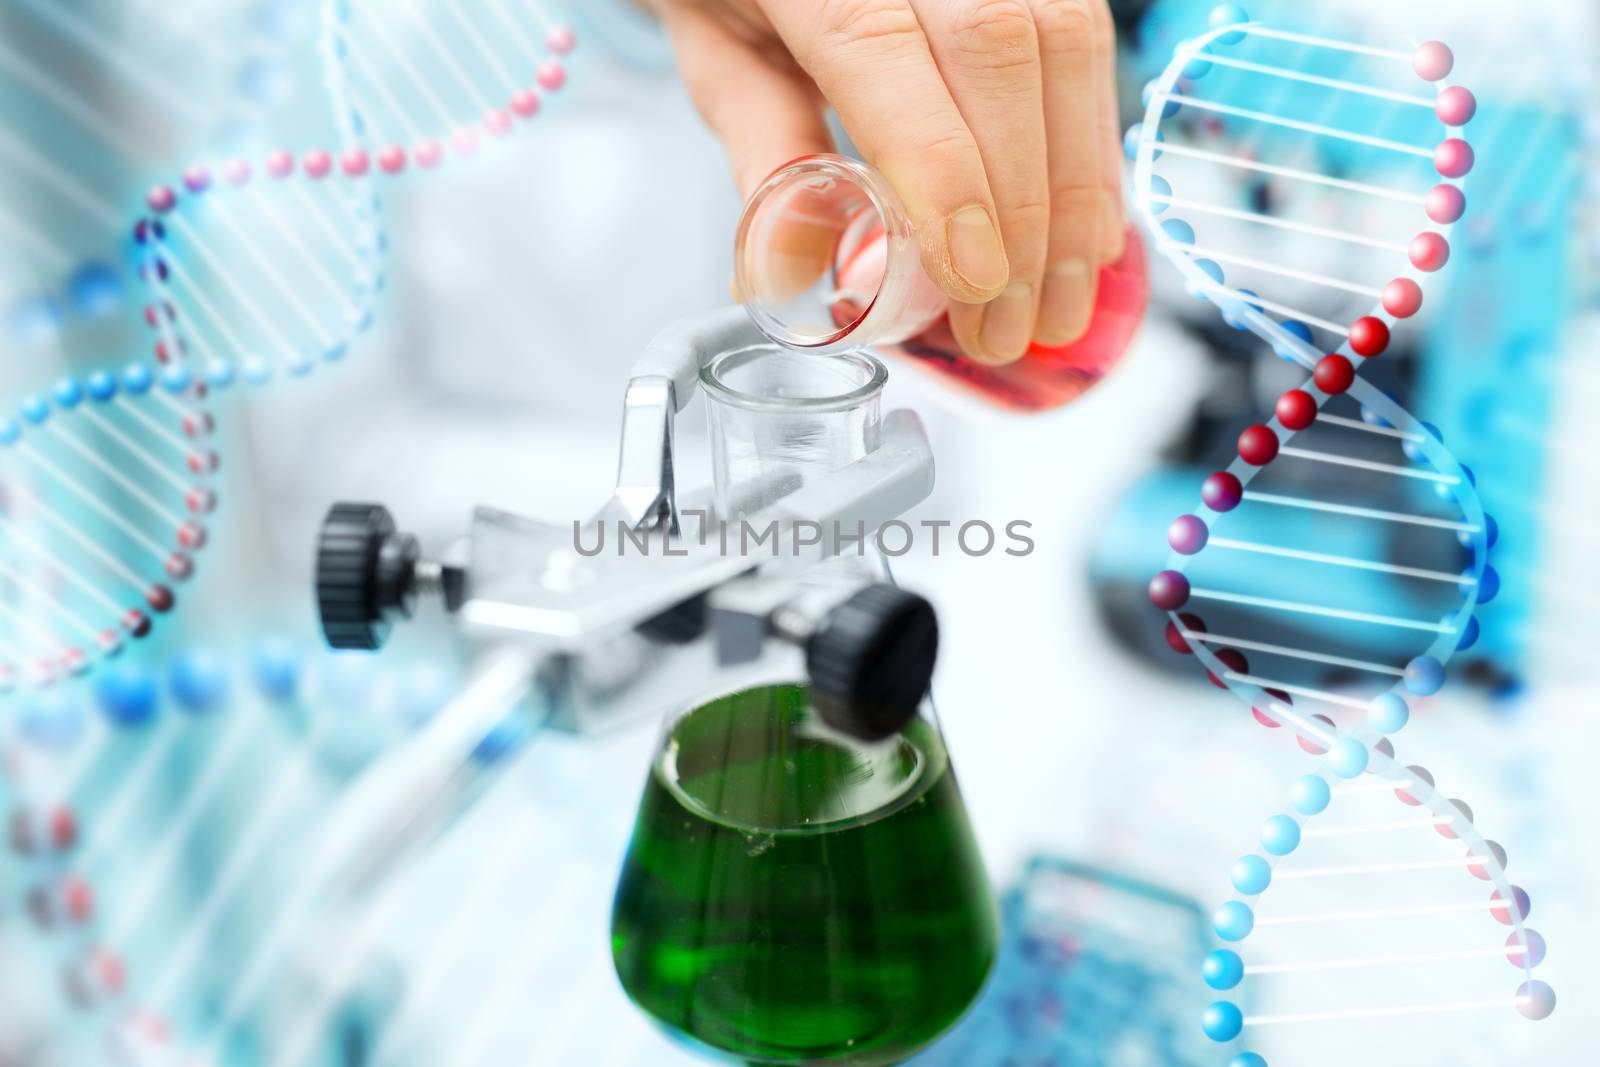 science, chemistry, biology, medicine and people concept - close up of scientist hand filling test tubes and making research in clinical laboratory over dna molecule structure